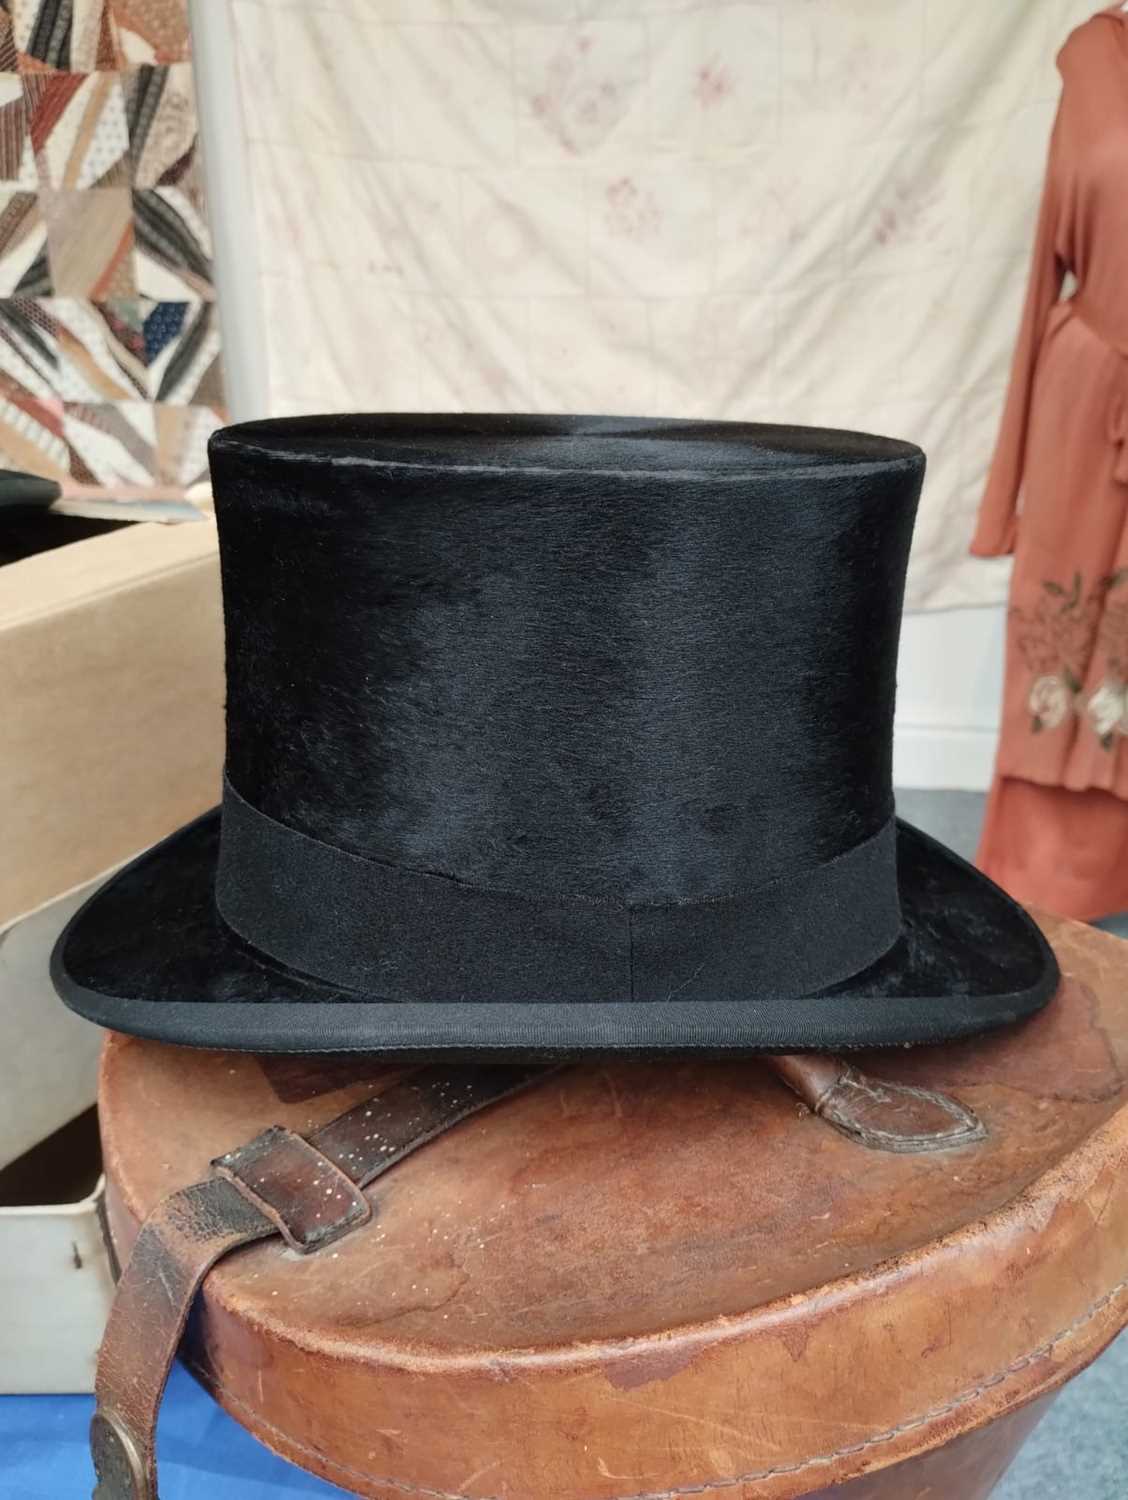 Black Silk Top Hat in Fitted Leather Hat Case with lime green cotton lining 20.5cm by 16.5cm, - Image 14 of 16